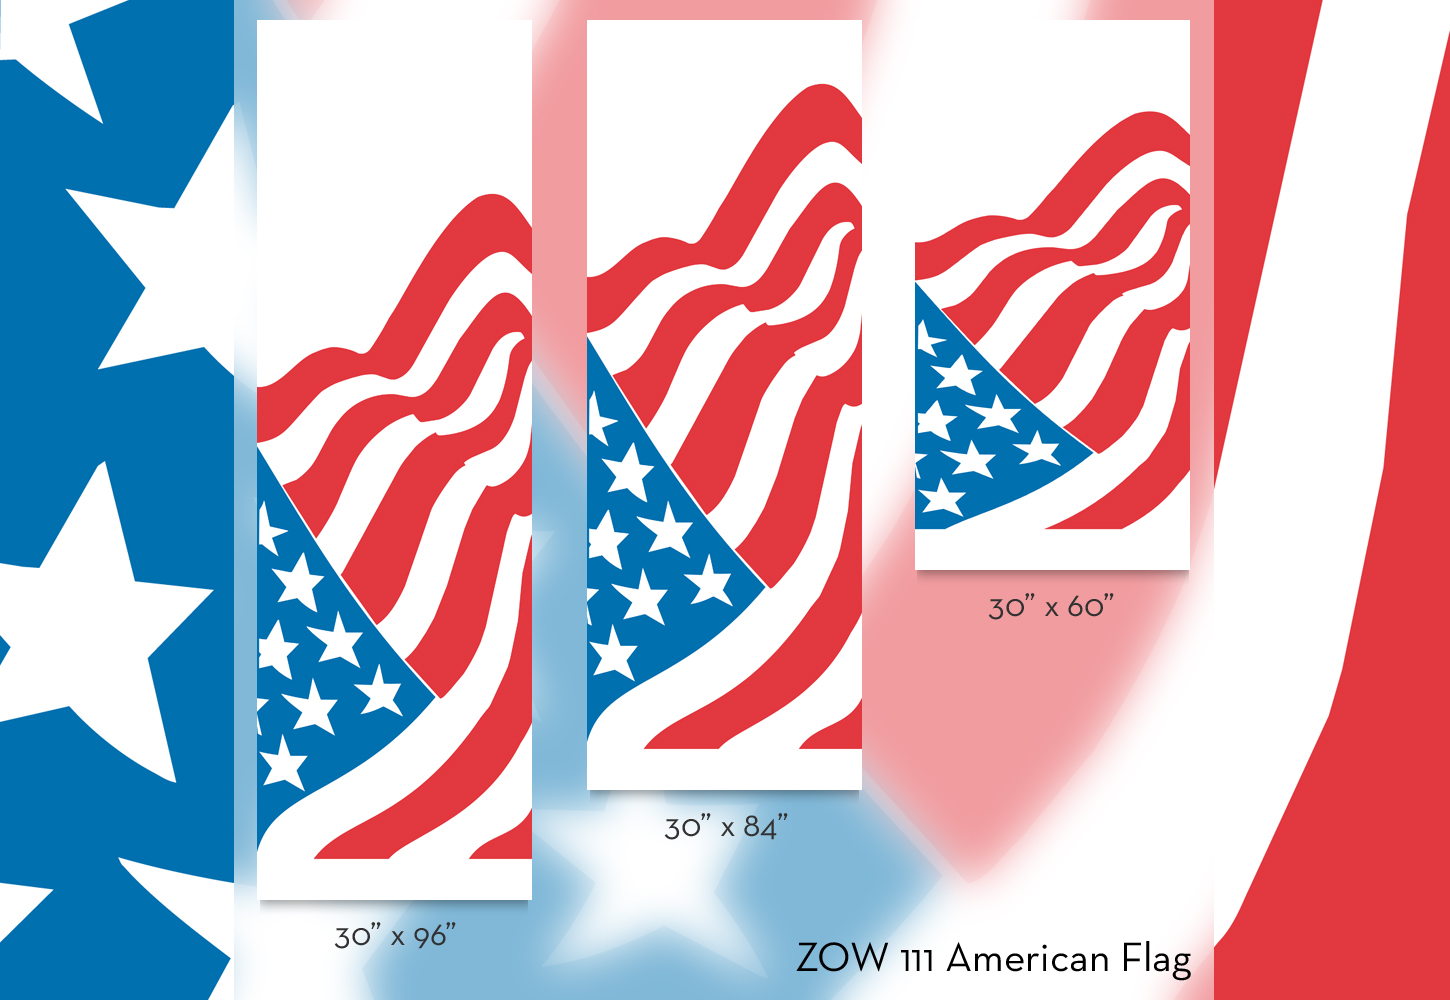 ZOW 111 American Flag